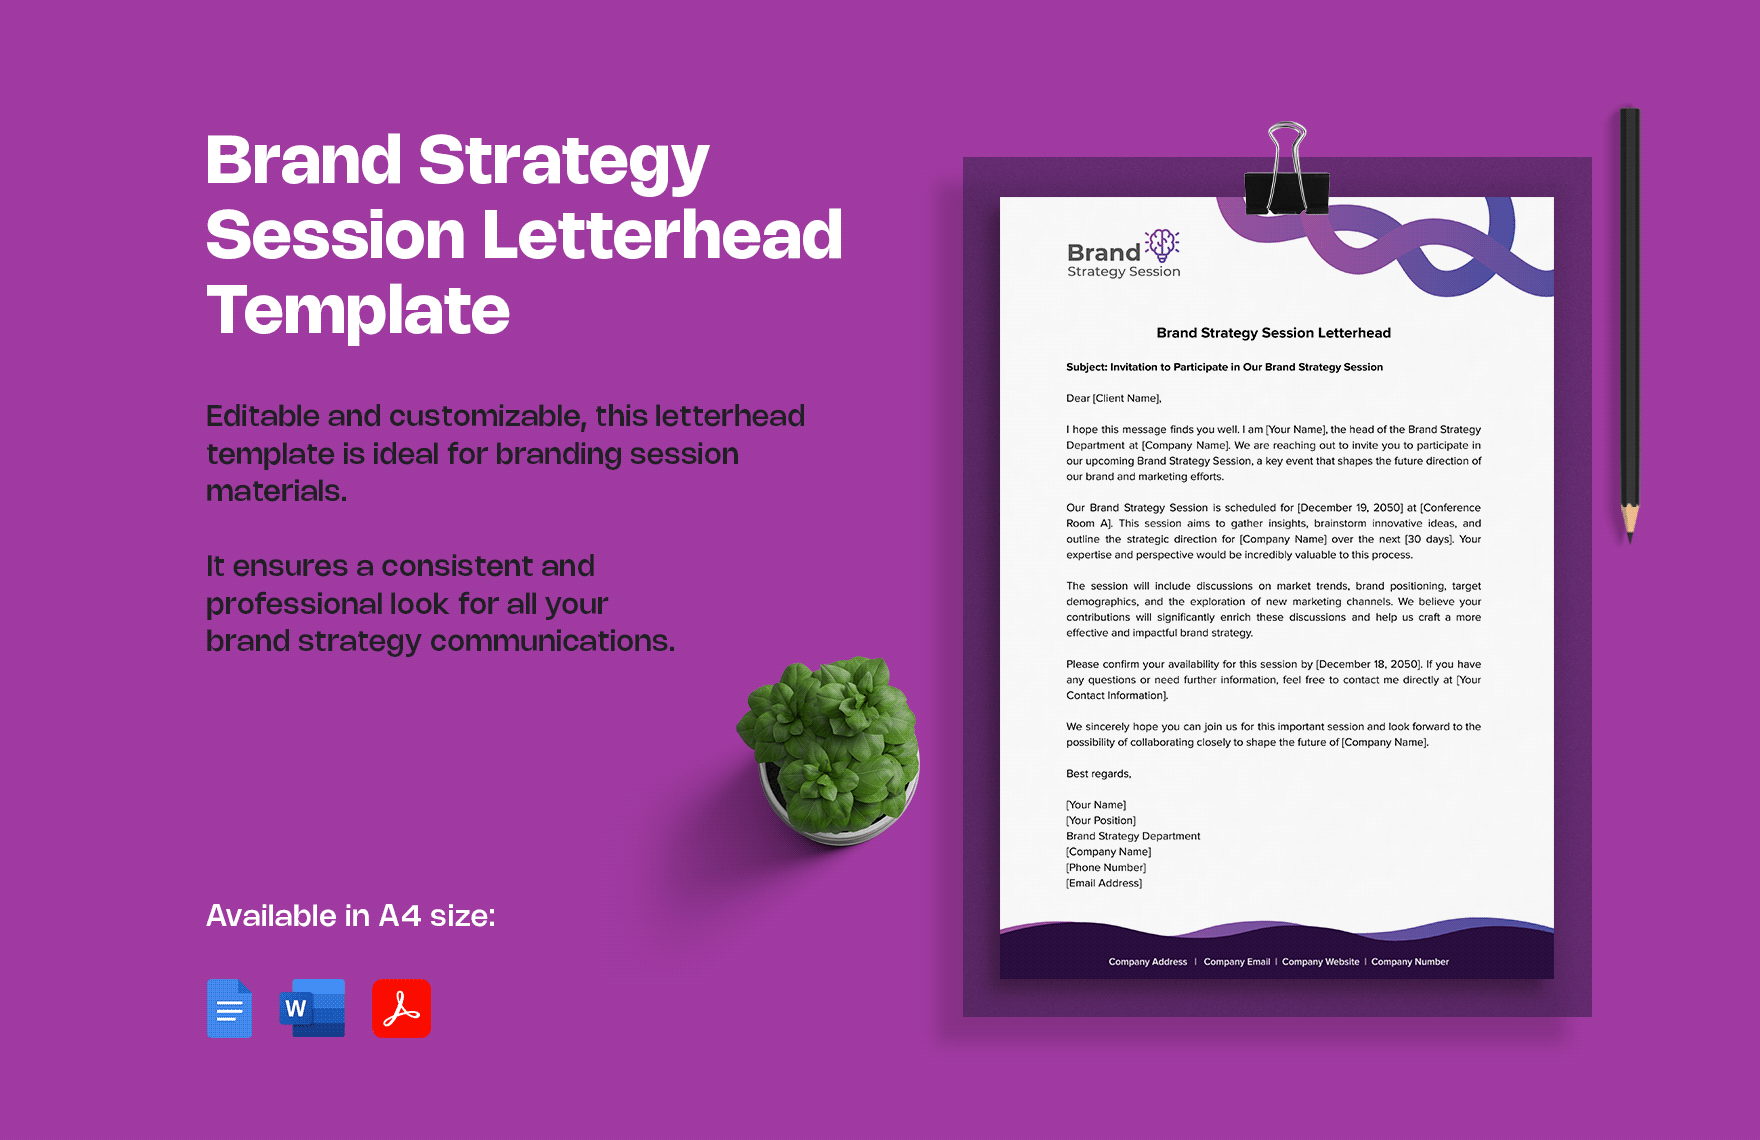 Brand Strategy Session Letterhead Template